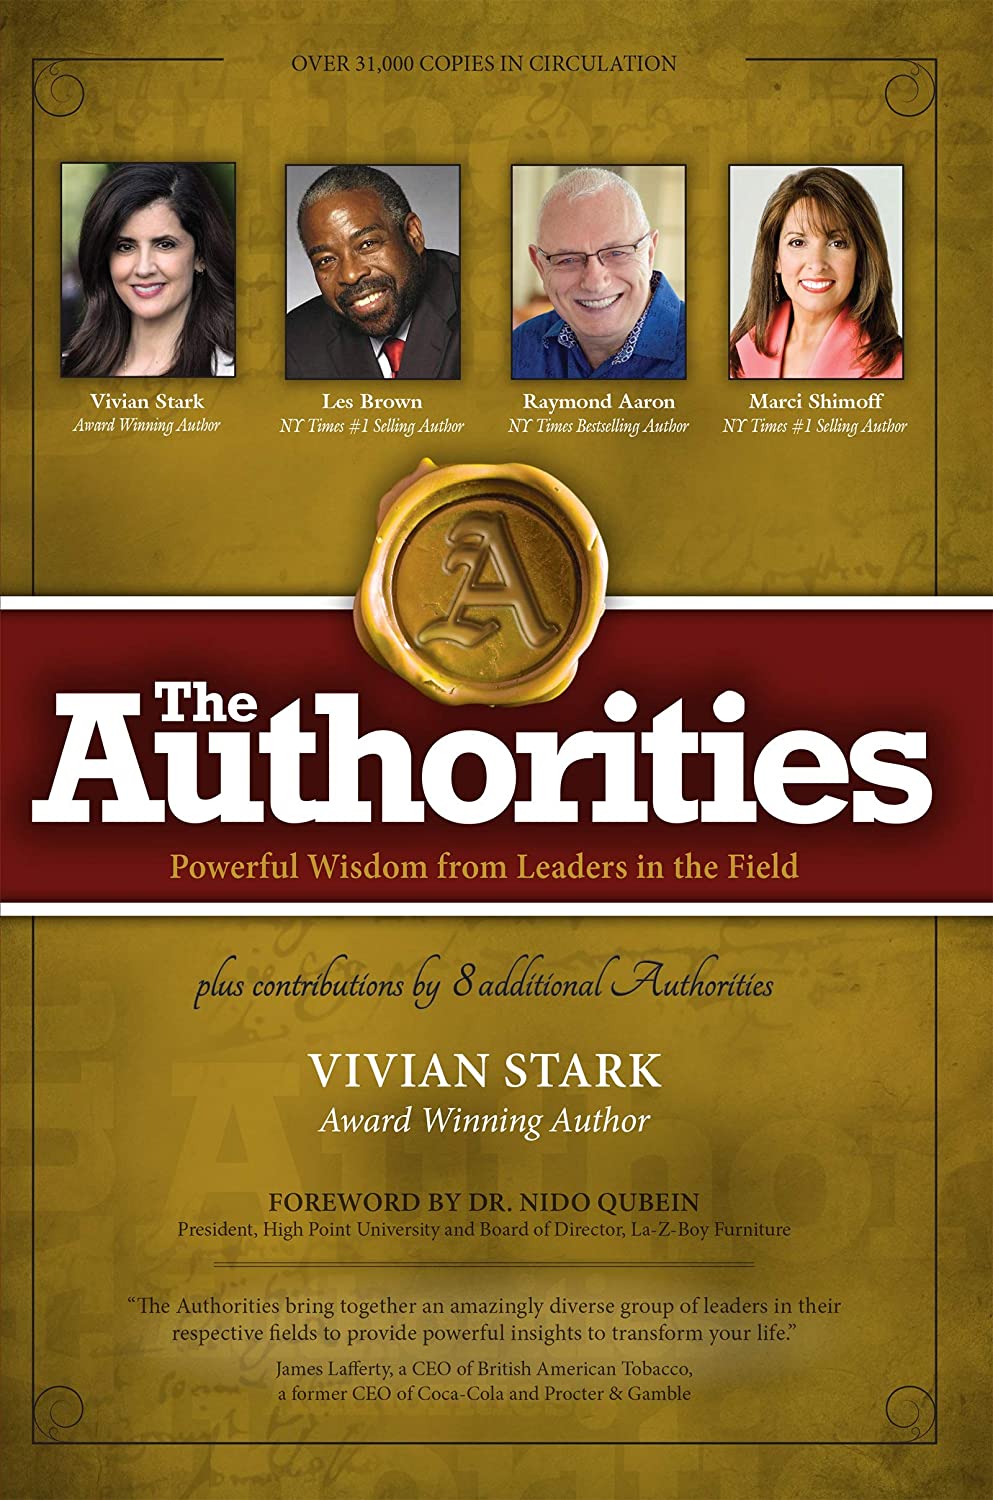 The Authorities - Vivian Stark: Powerful Wisdom from Leaders in the Field